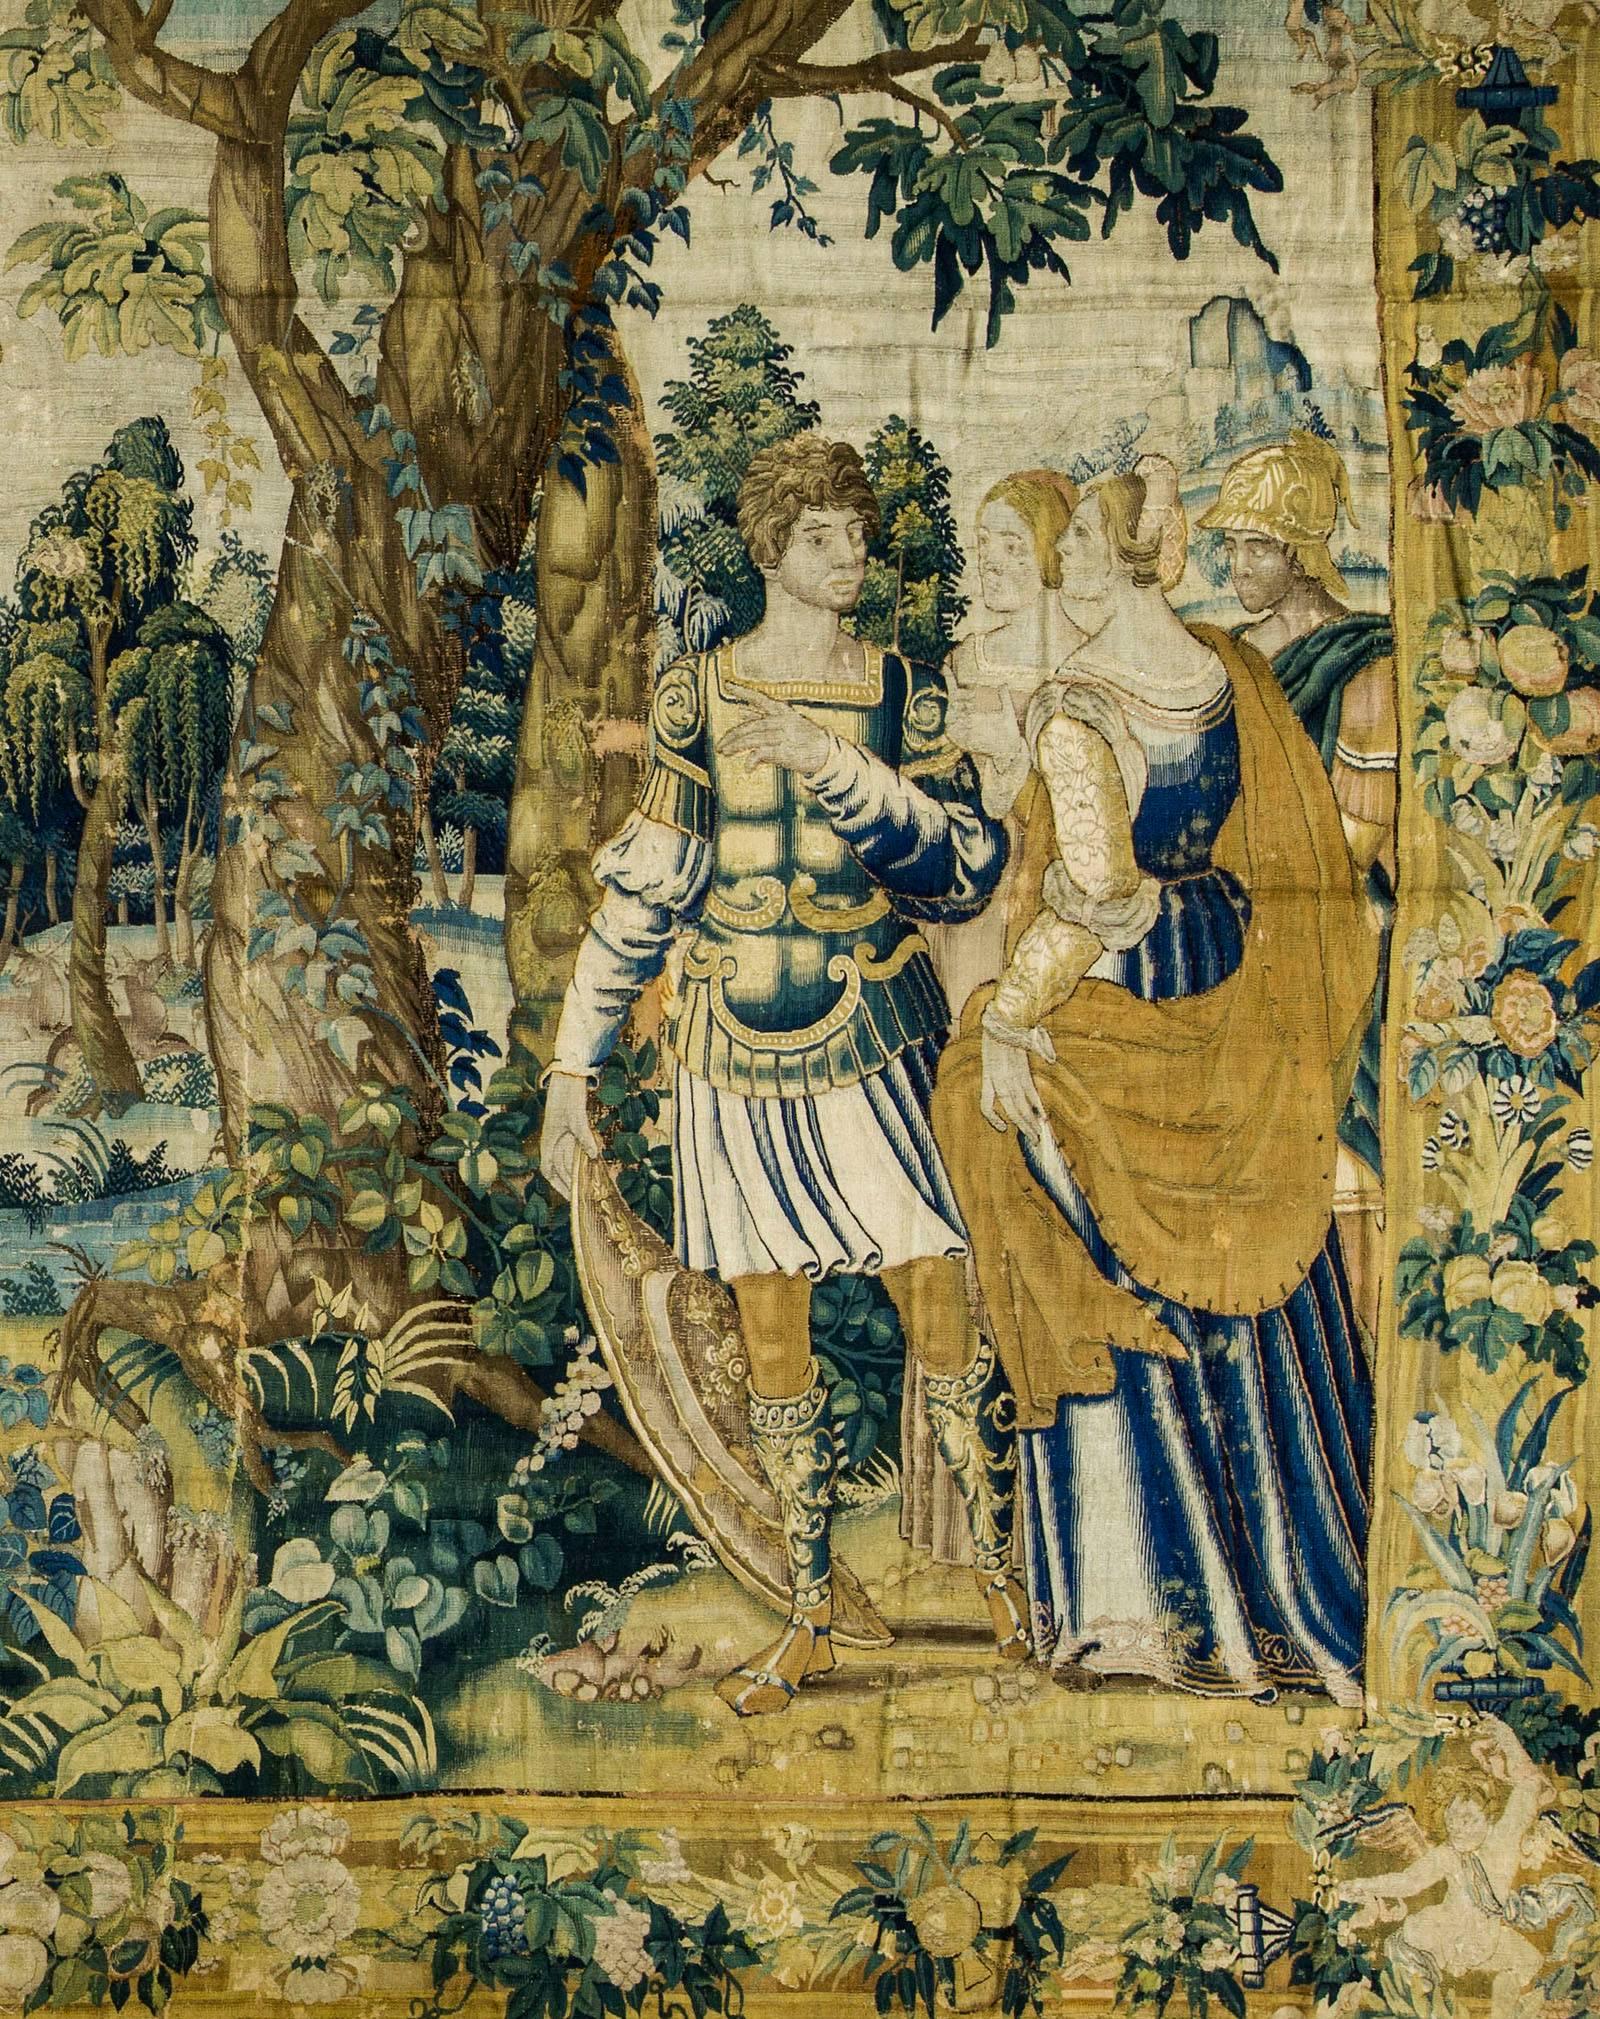 Late 16th Century Audenarde Mythological Tapestry 21'6 x 11'4 In Excellent Condition For Sale In Secaucus, NJ